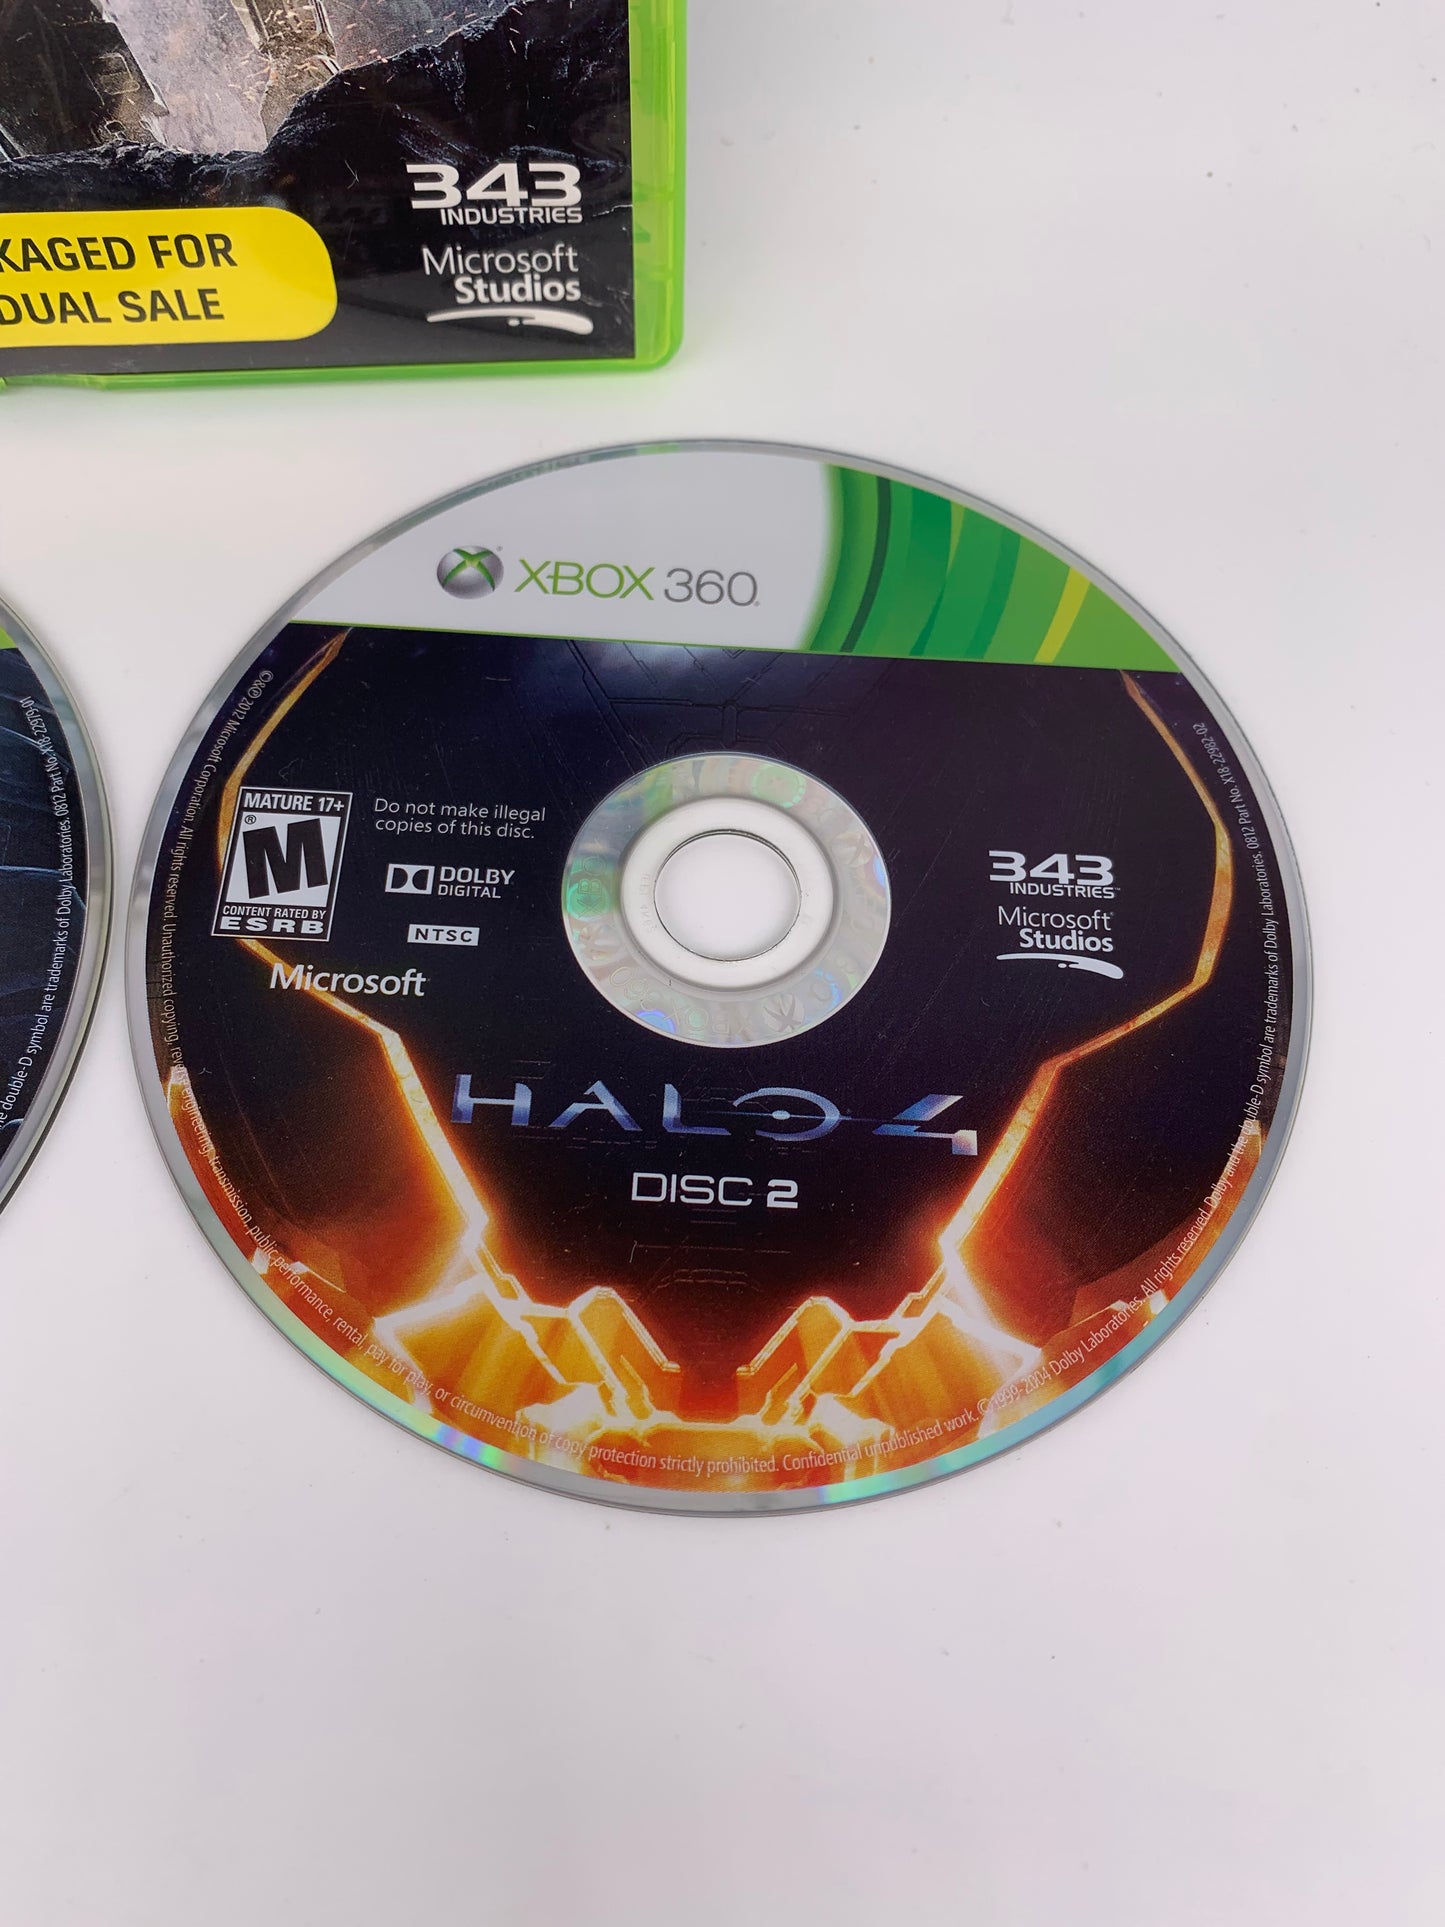 MiCROSOFT XBOX 360 | HALO 4 | NOT FOR RESALE